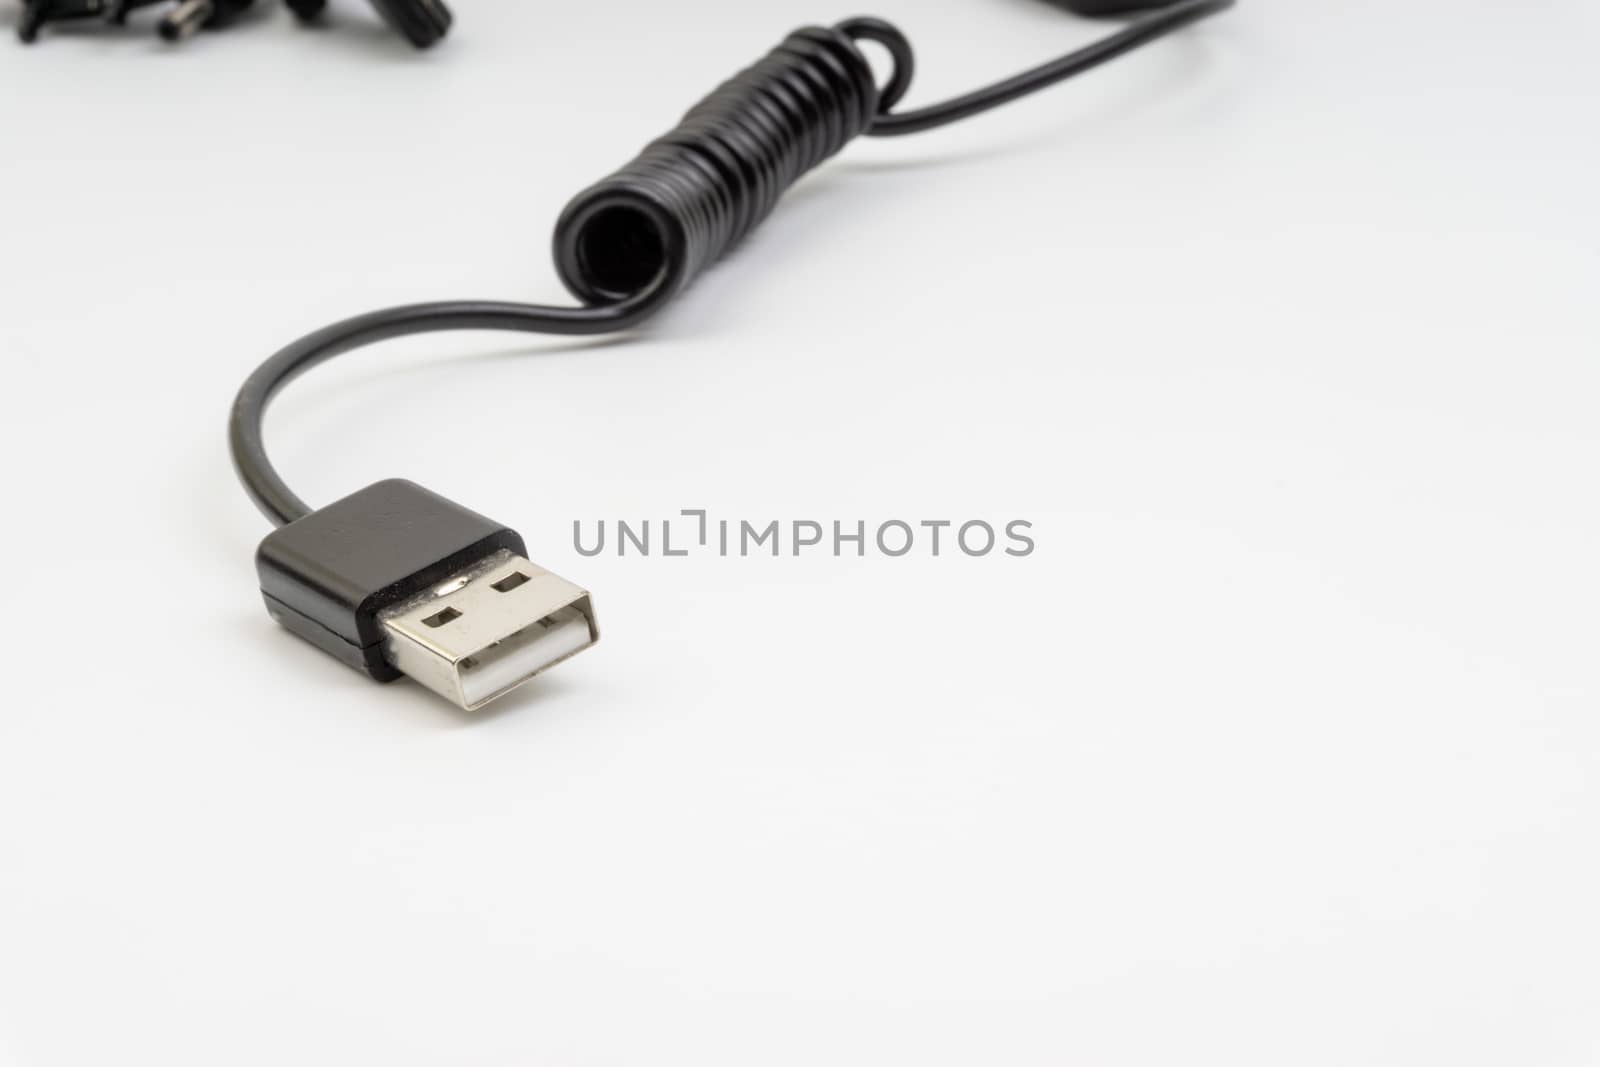 Universal recharger head or usb cable isolated on white background. Selective focus and crop fragment